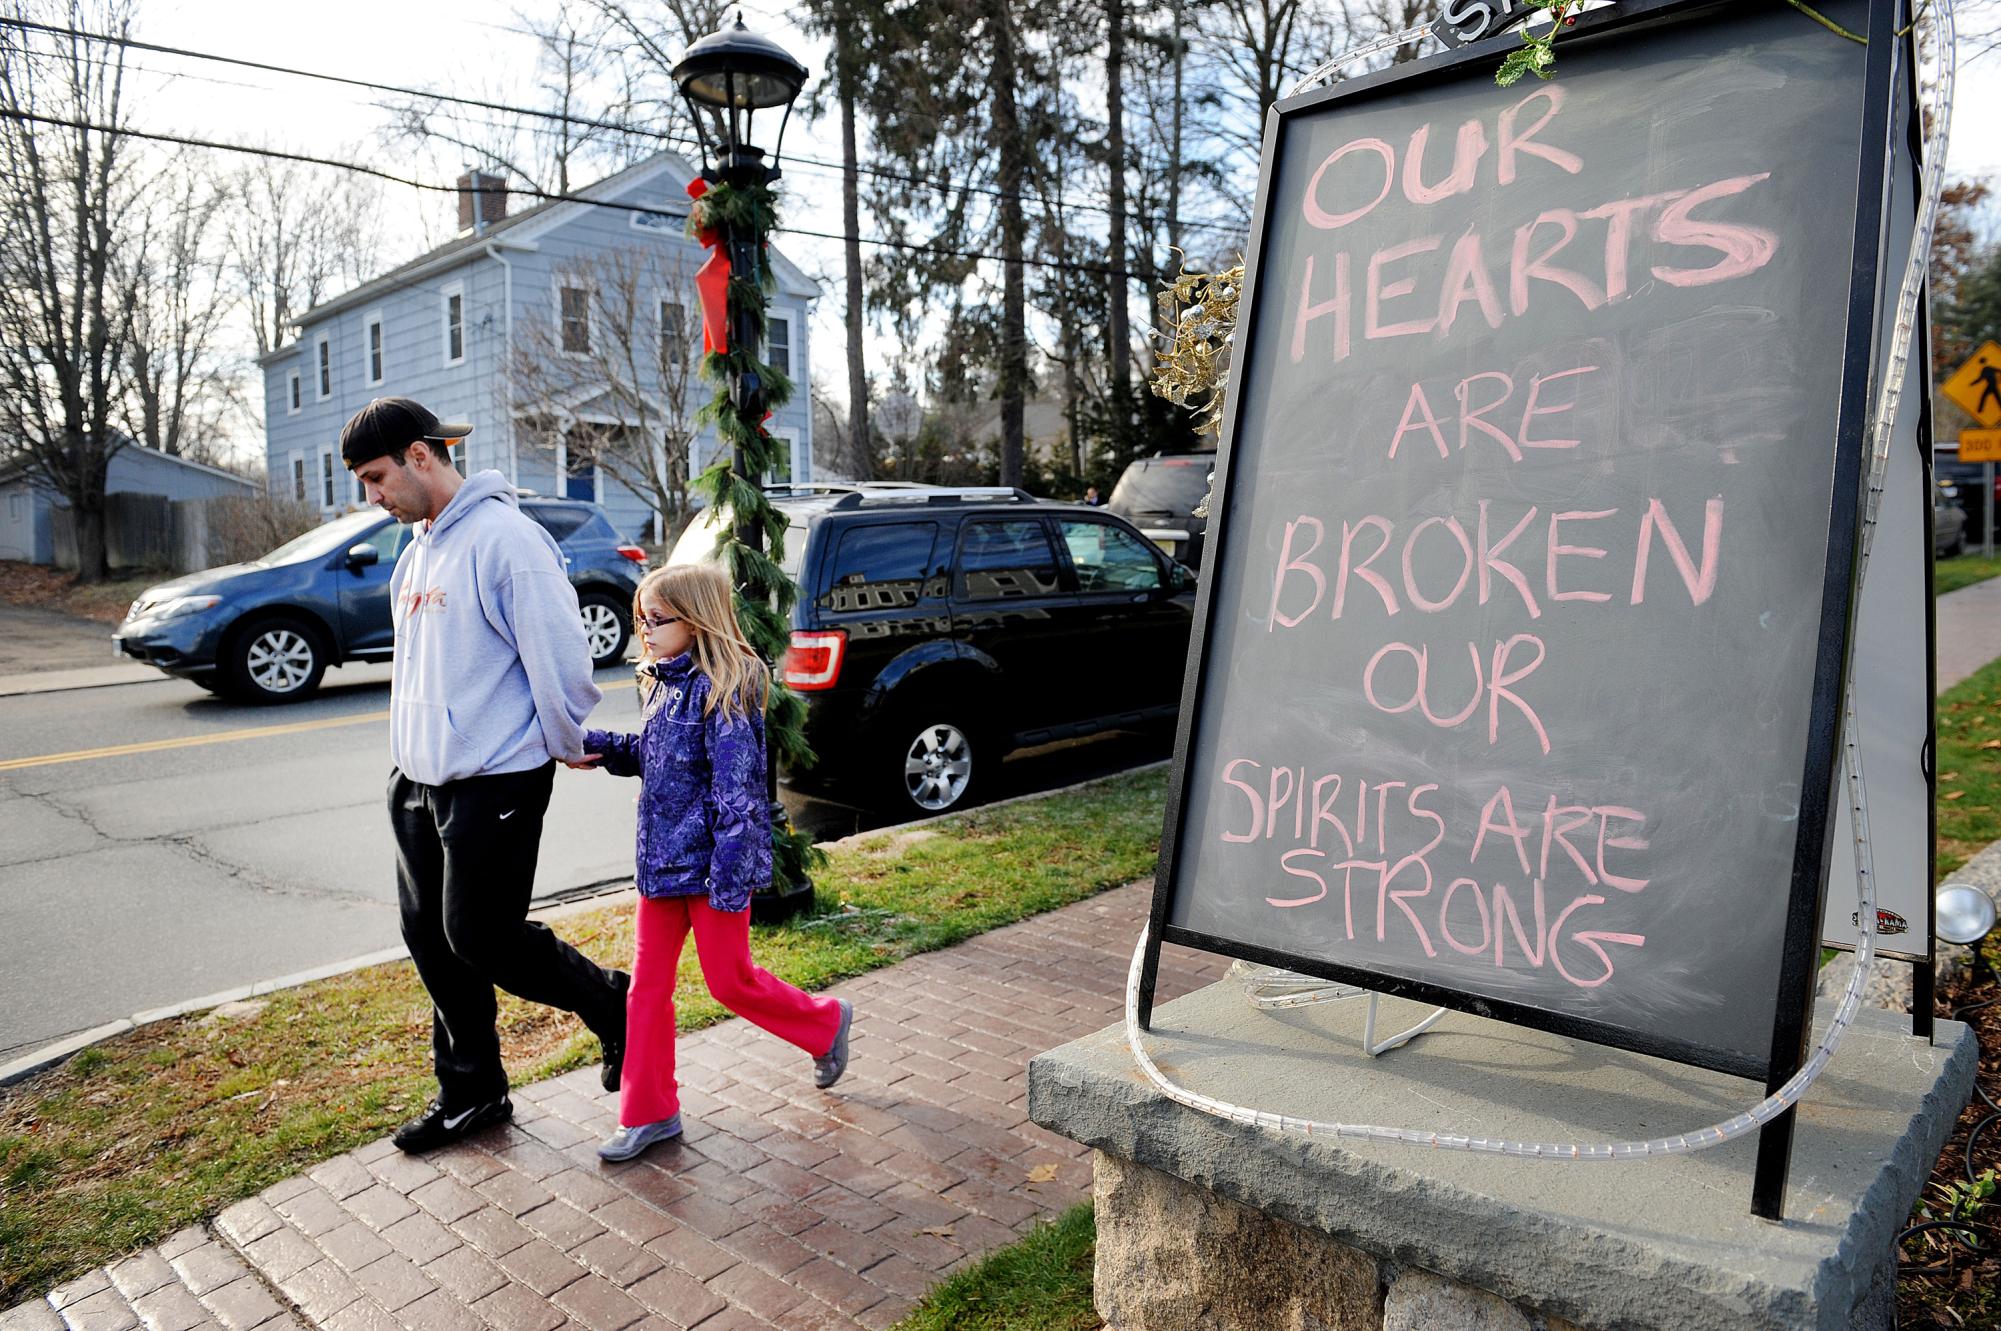 A sign speaks to the grief felt by residents from Newtown, Connecticut, on Saturday, December 15, 2012, a day after a shooting at Sandy Hook Elementary School where 26 people died.